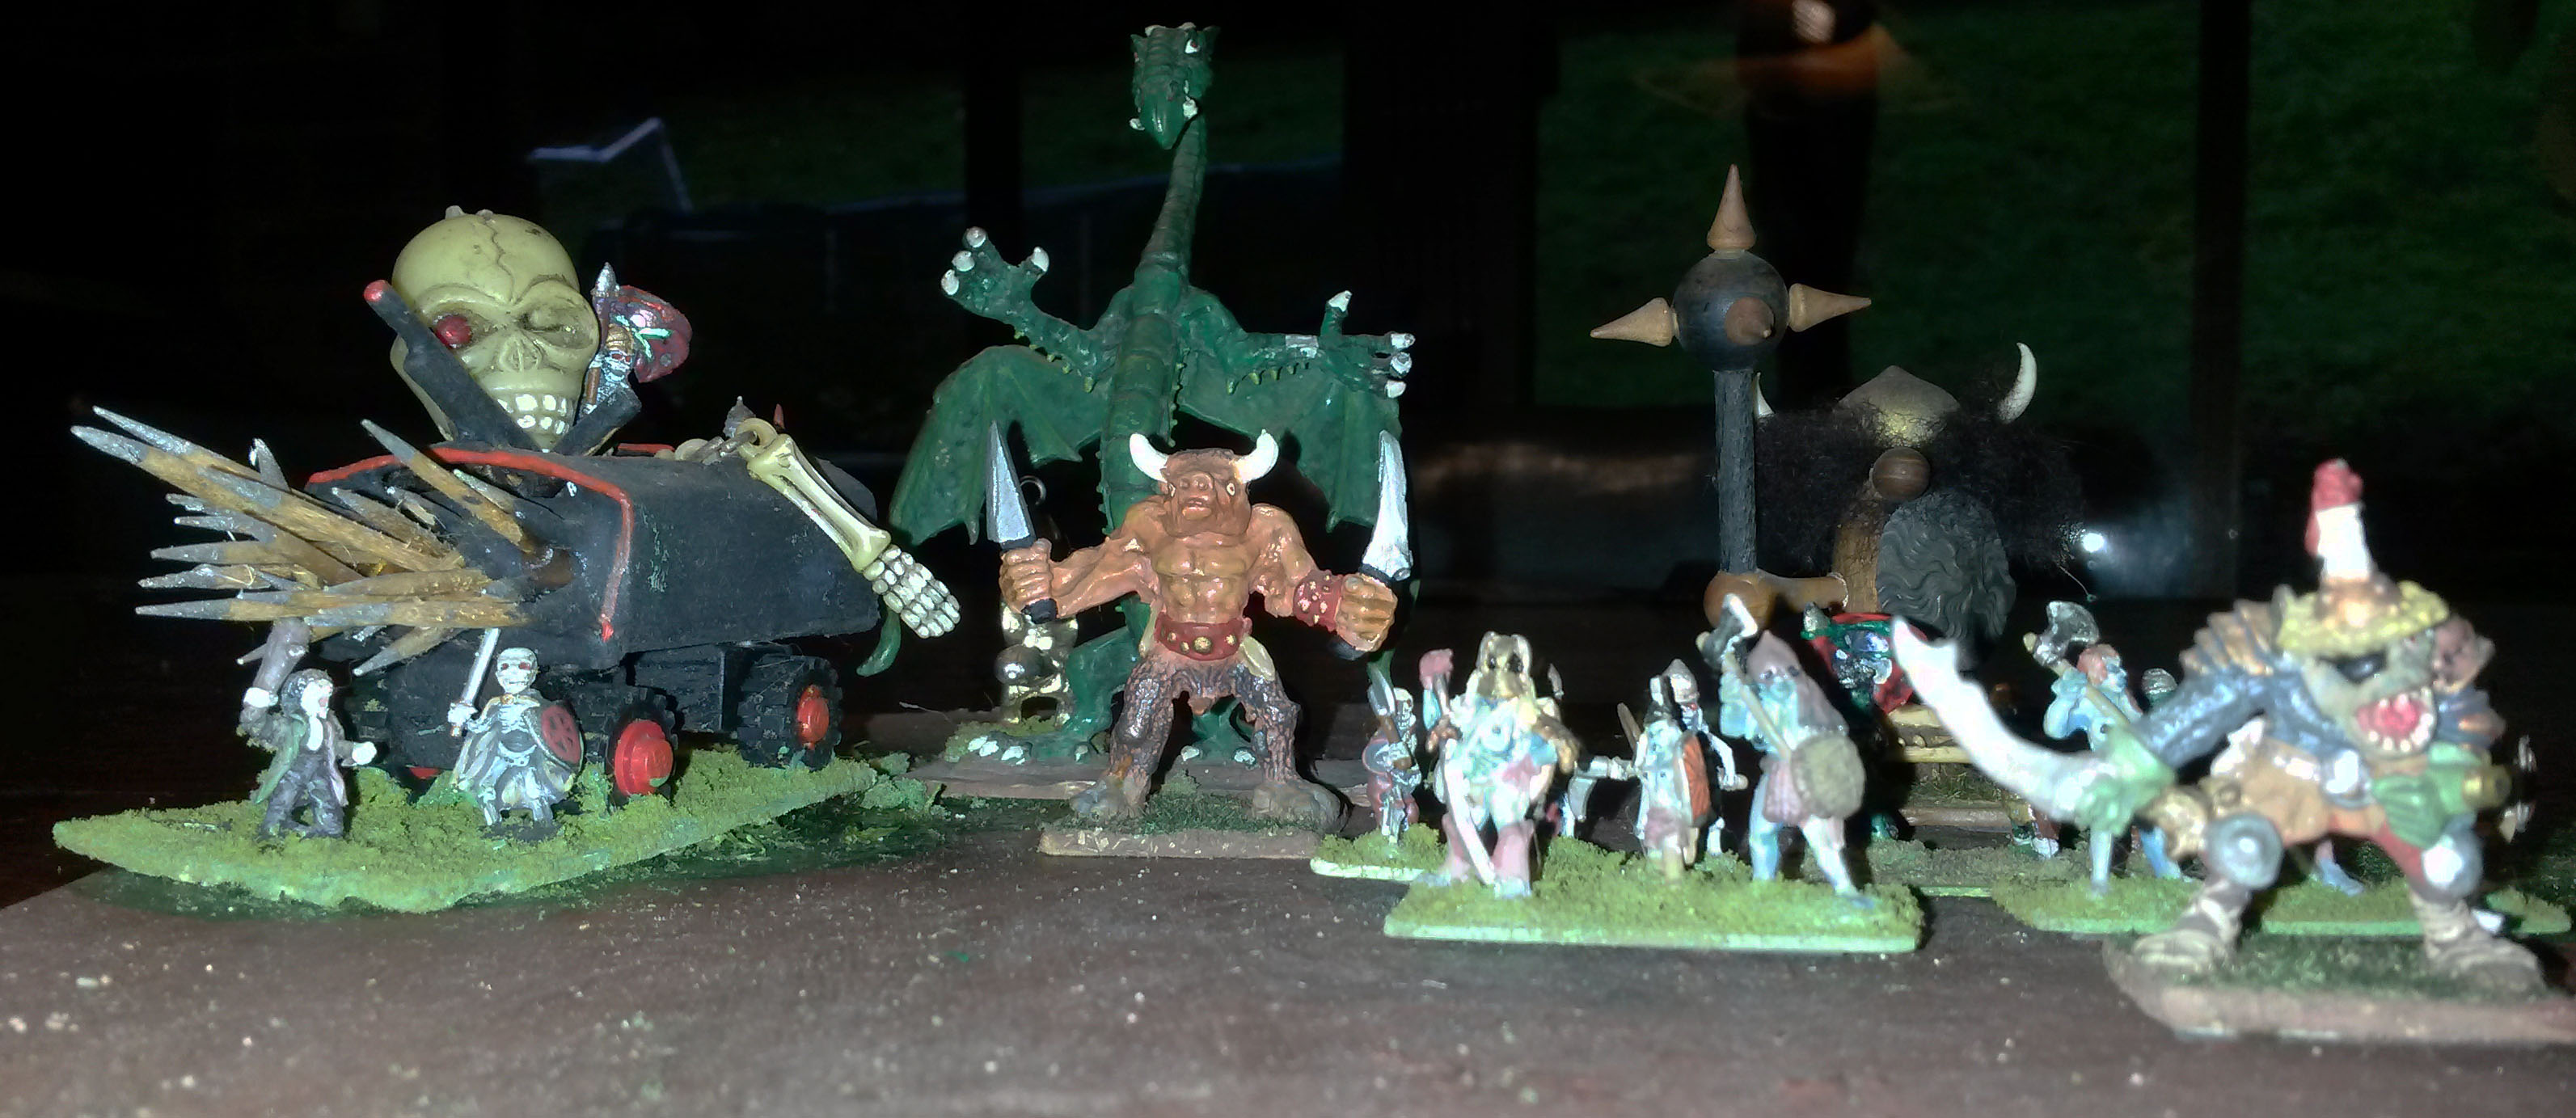 My Warhammer figures from the 80's.jpg